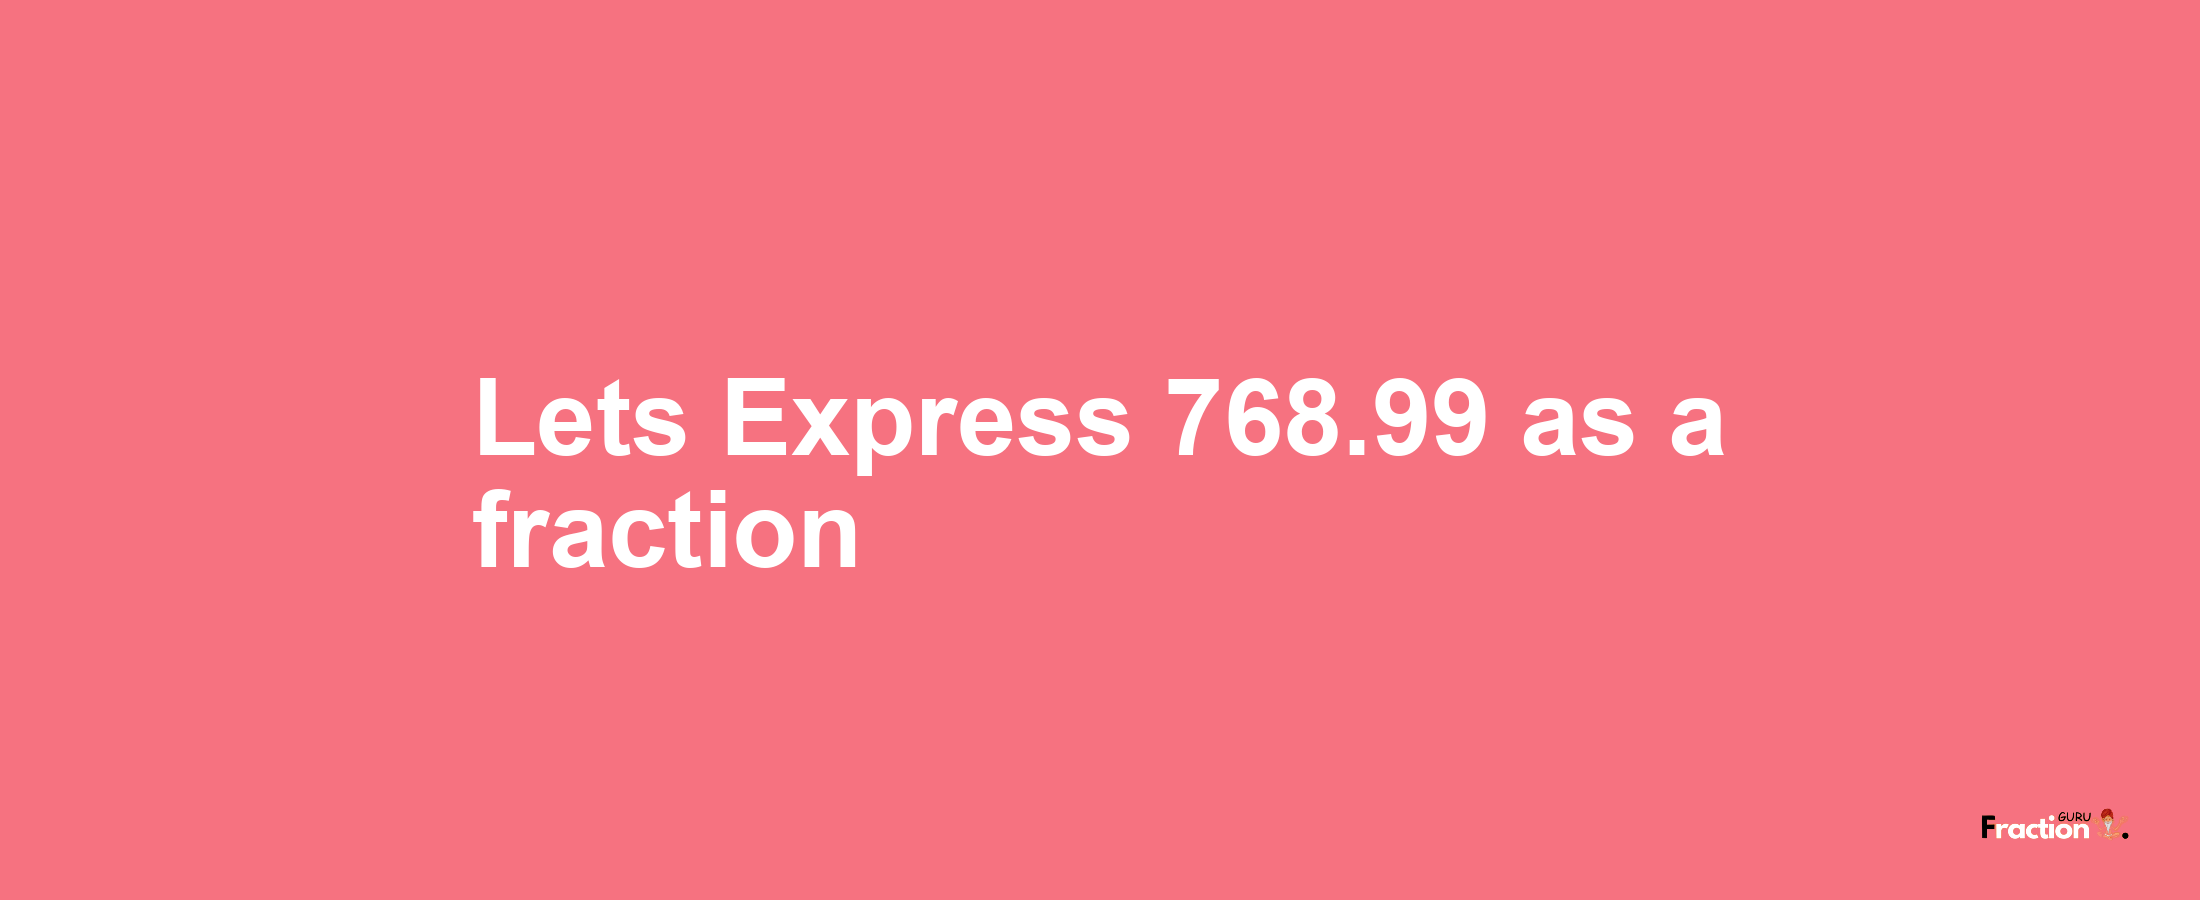 Lets Express 768.99 as afraction